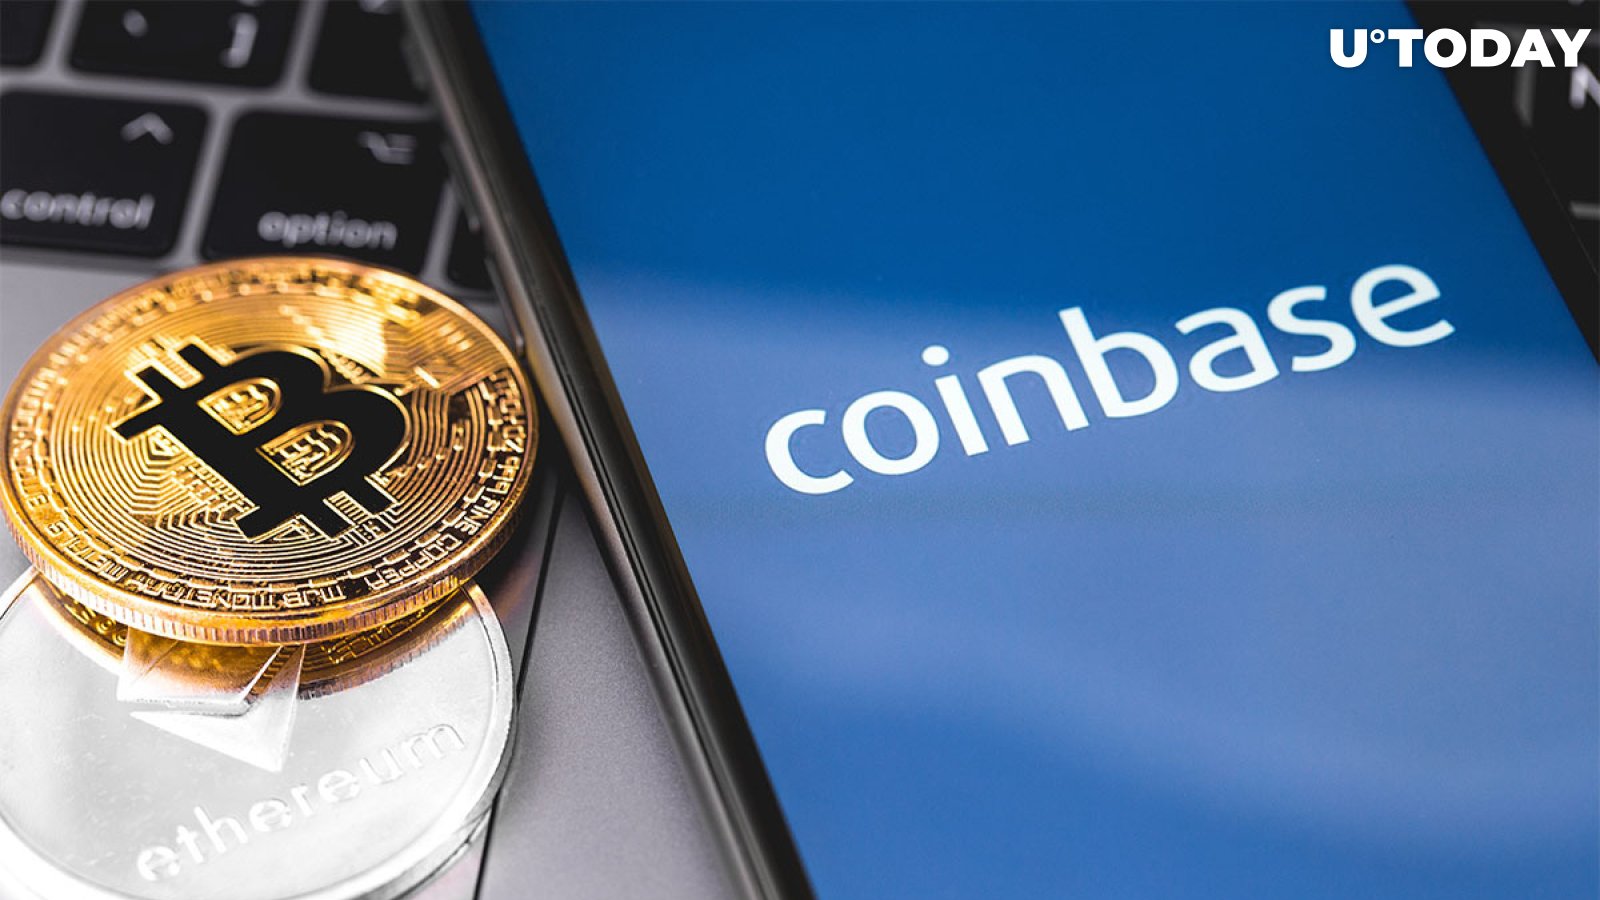 Coinbase Top Management Sold Nearly All COINs Right After NASDAQ Listing. What Does This Mean?